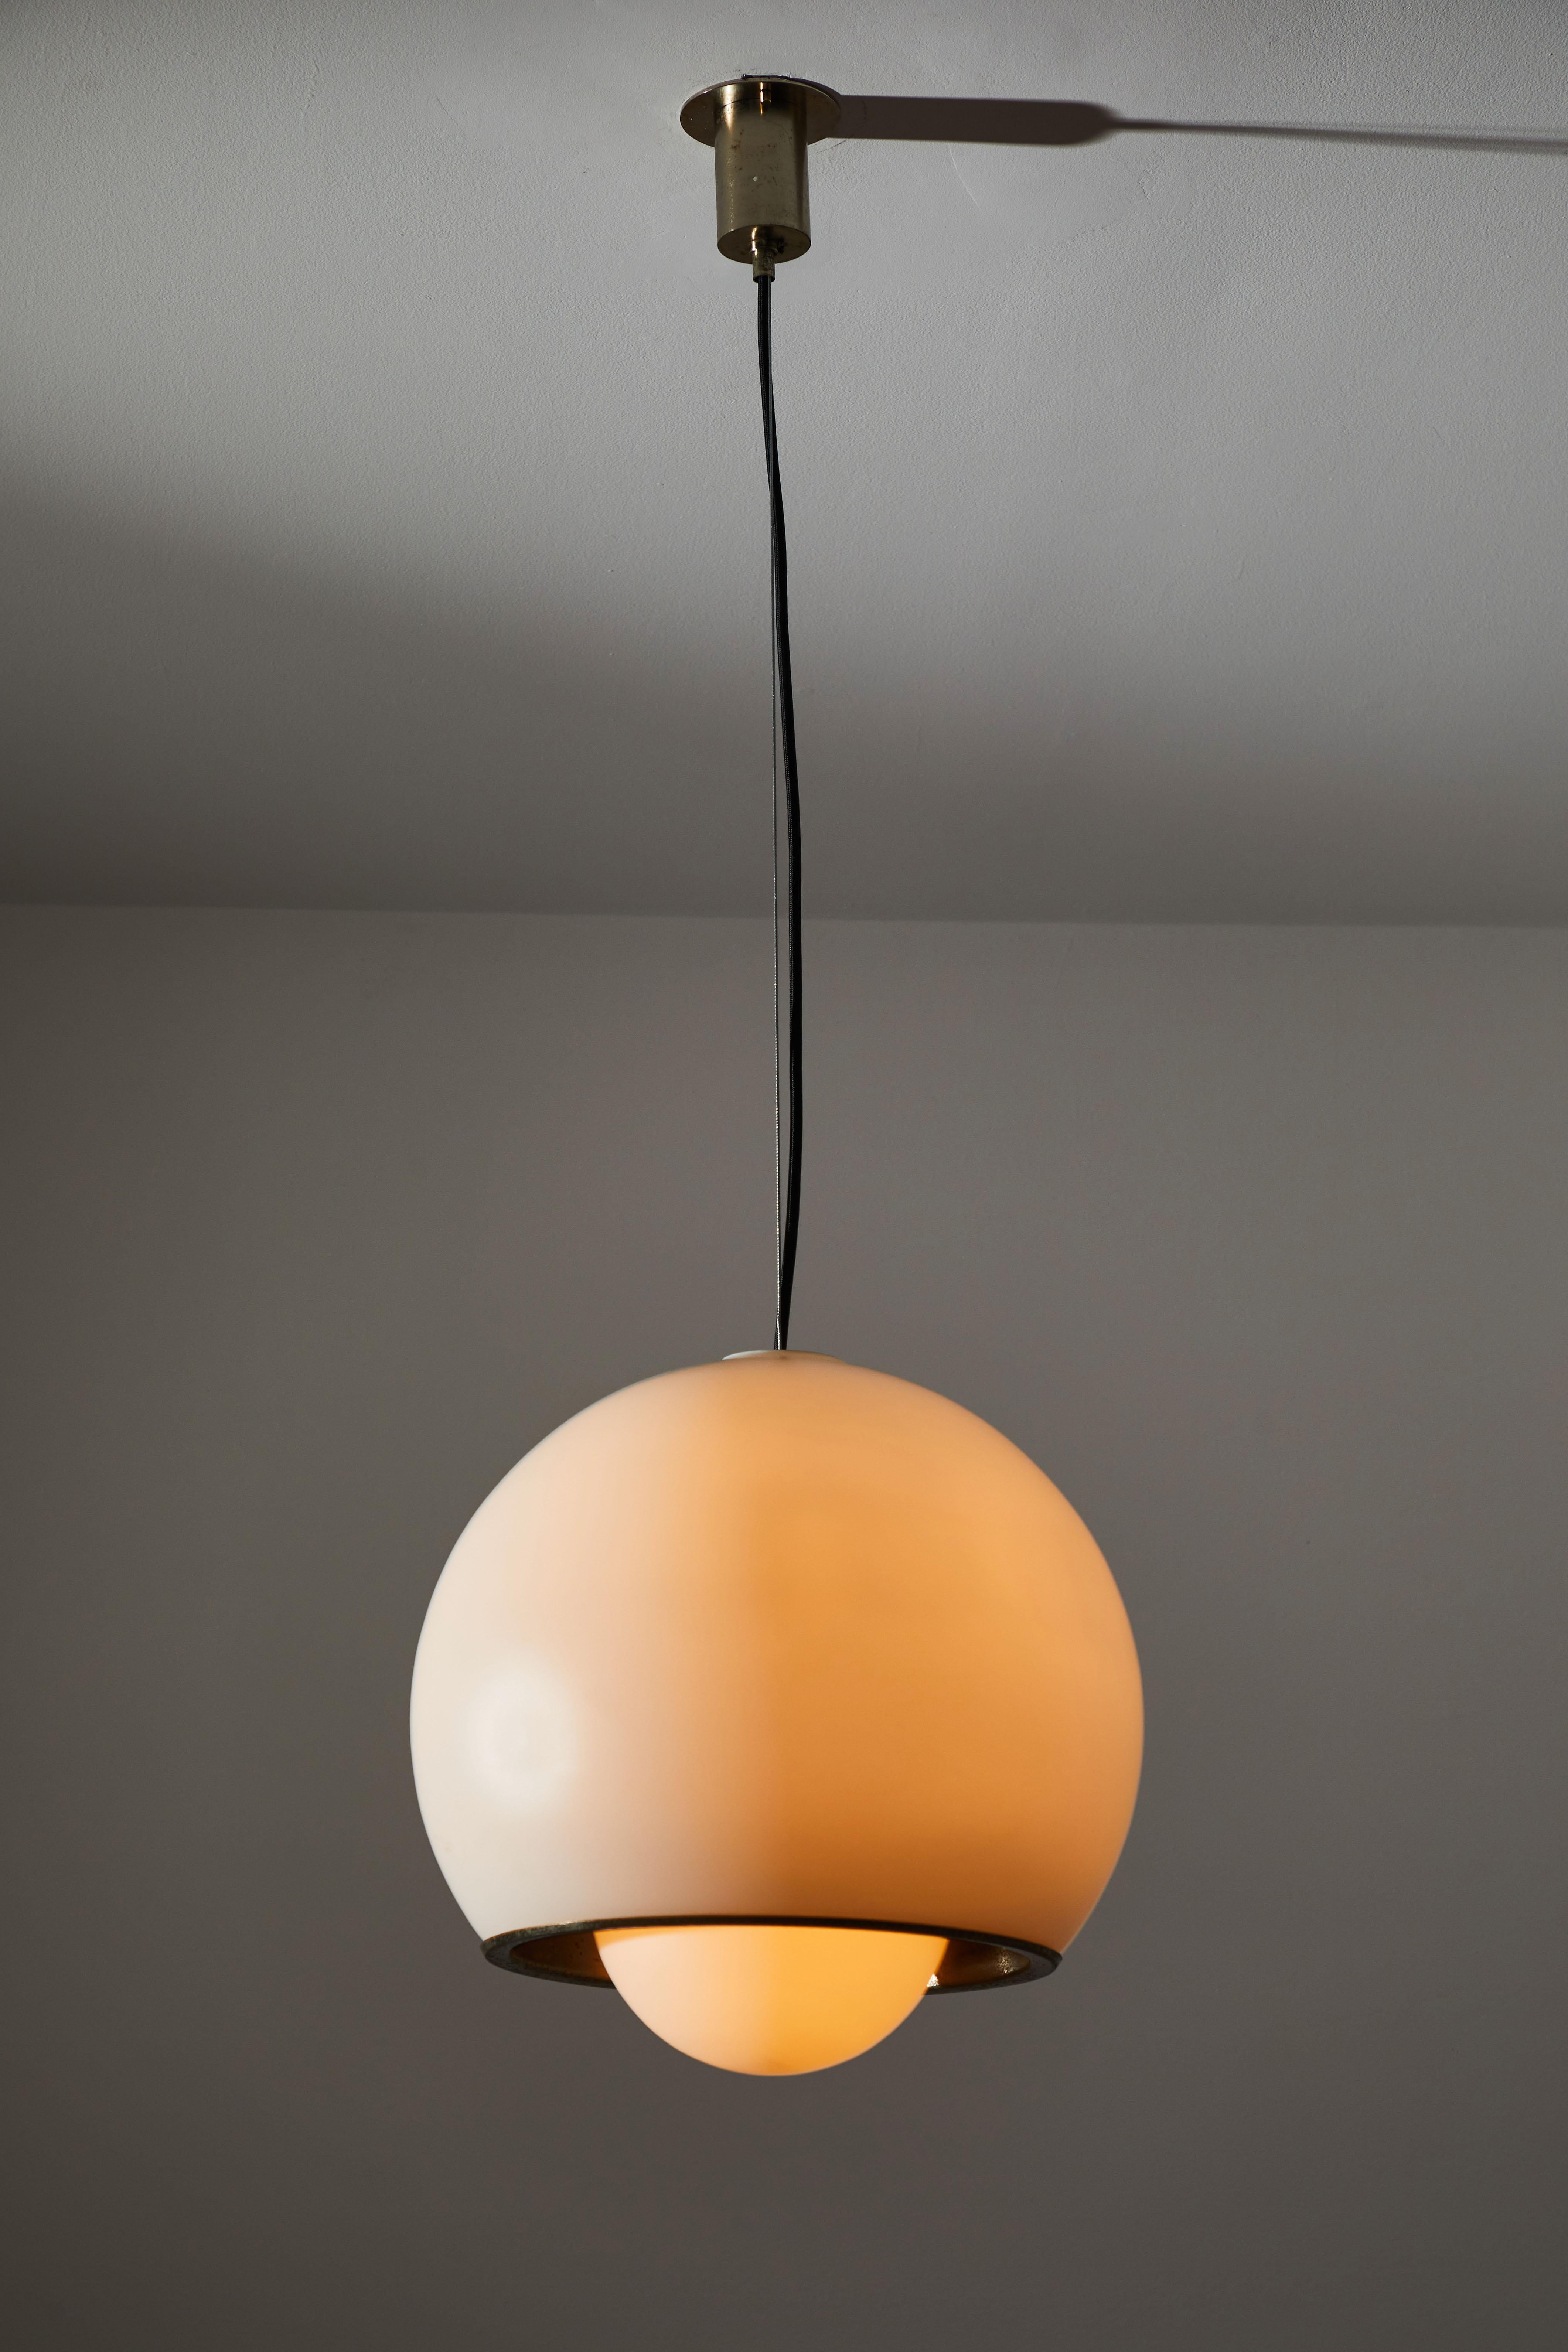 Suspension light by Fontana Arte. Designed and manufactured in Italy, circa 1960s. Satin glass diffuser, satin nickel hardware. Custom ceiling plate. Rewired for U.S. standards. We recommend one E27 60 watt maximum bulb. Bulb provided as a one time